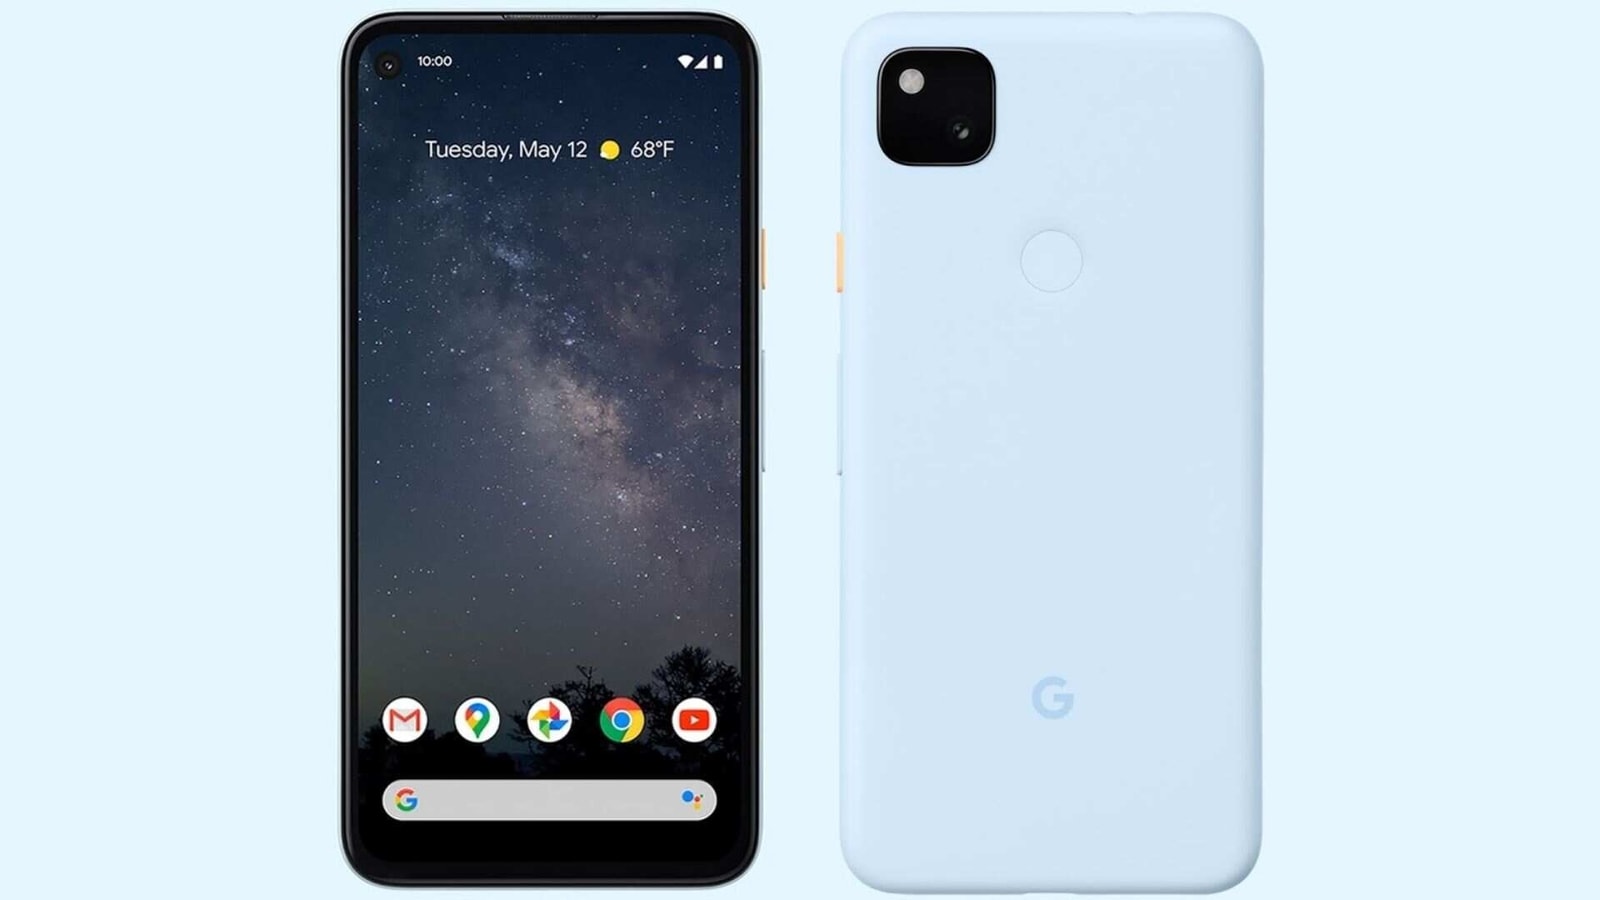 Google Pixel 4a launched in 'Barely Blue' colour | Mobile News